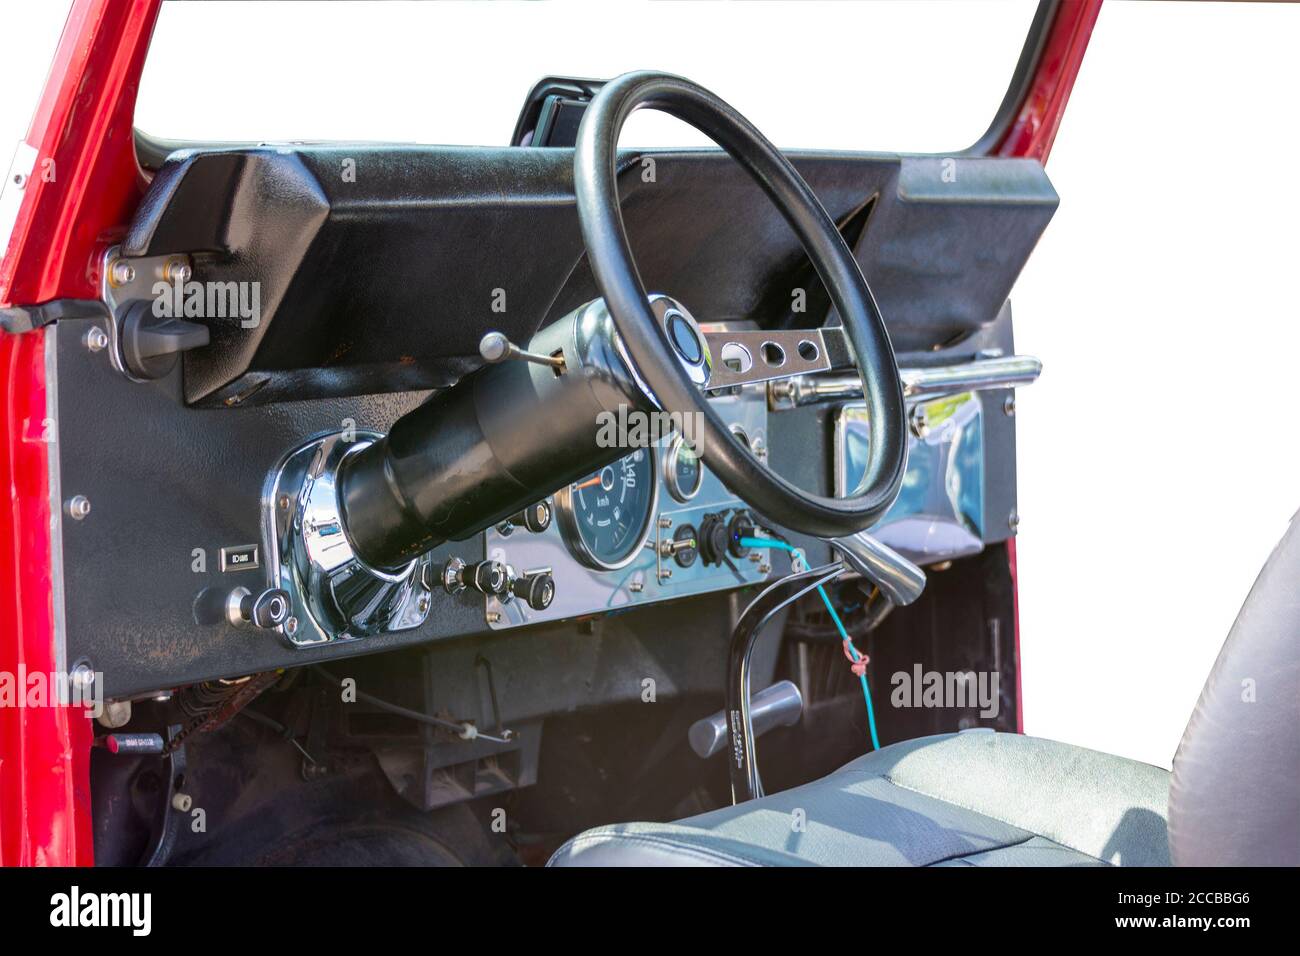 Fragment of the cockpit of a historic jeep with instruments and a steering wheel Stock Photo